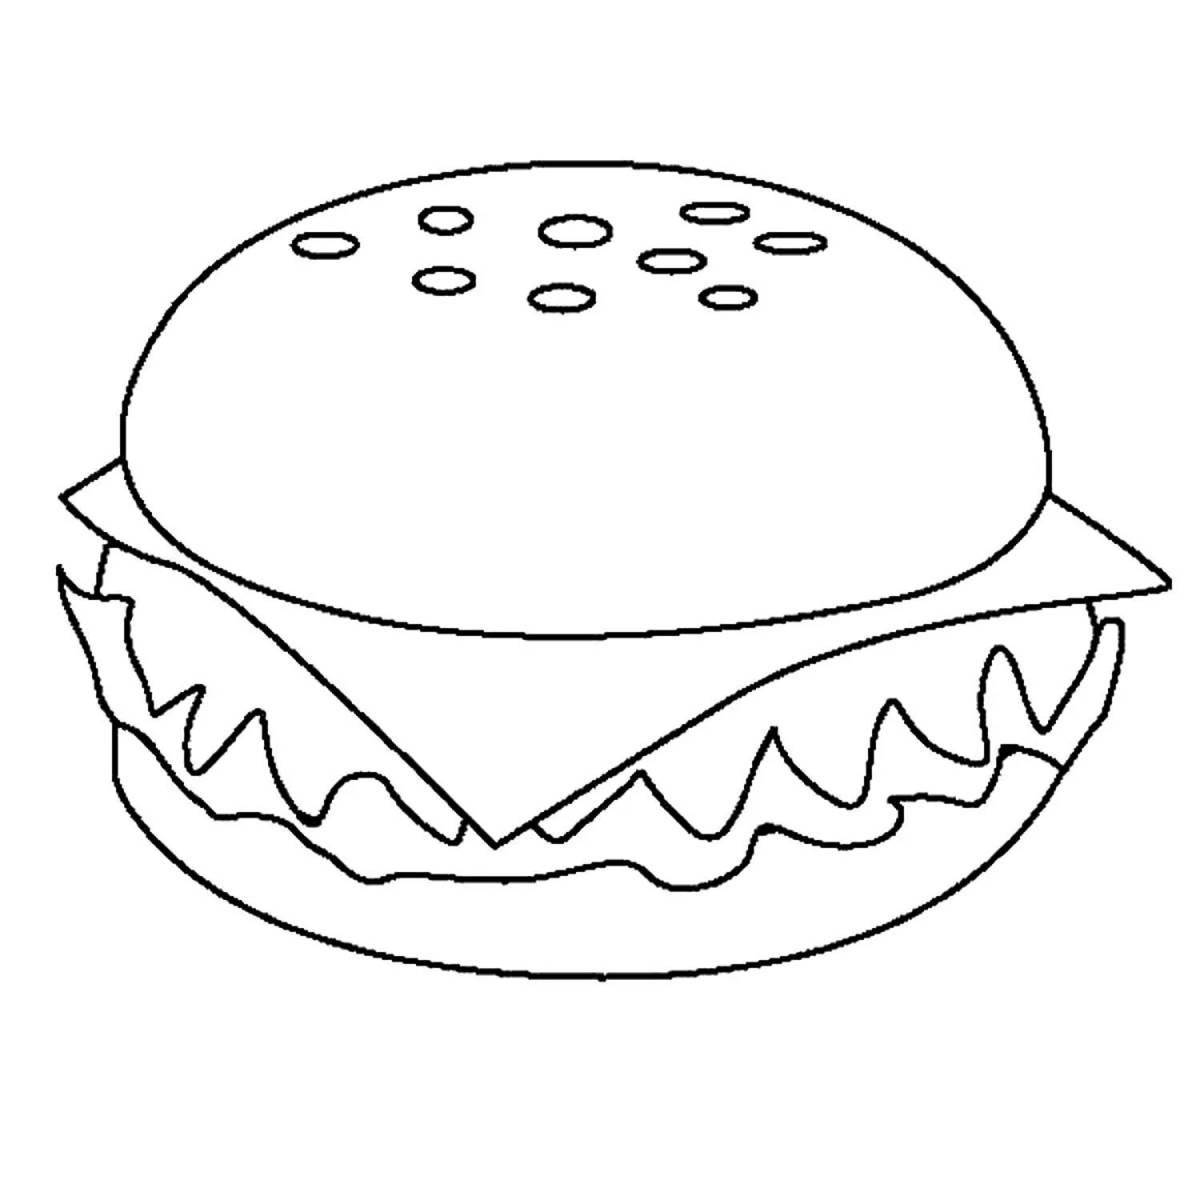 Amazing hamburger coloring page for kids